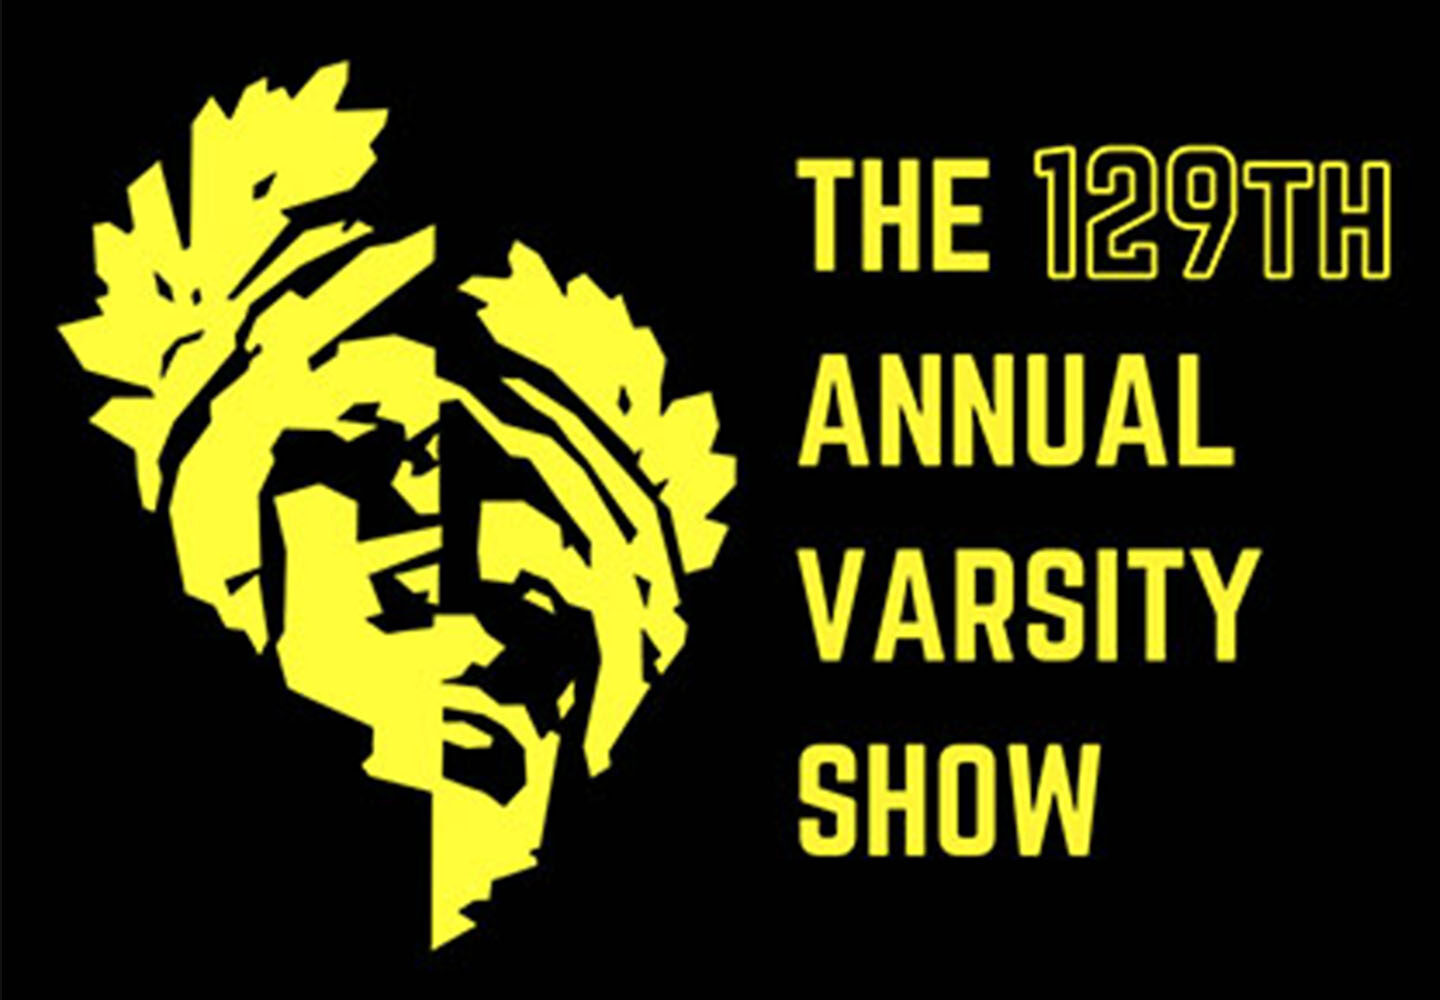 The 129th Annual Varsity Show: Transfer of Power